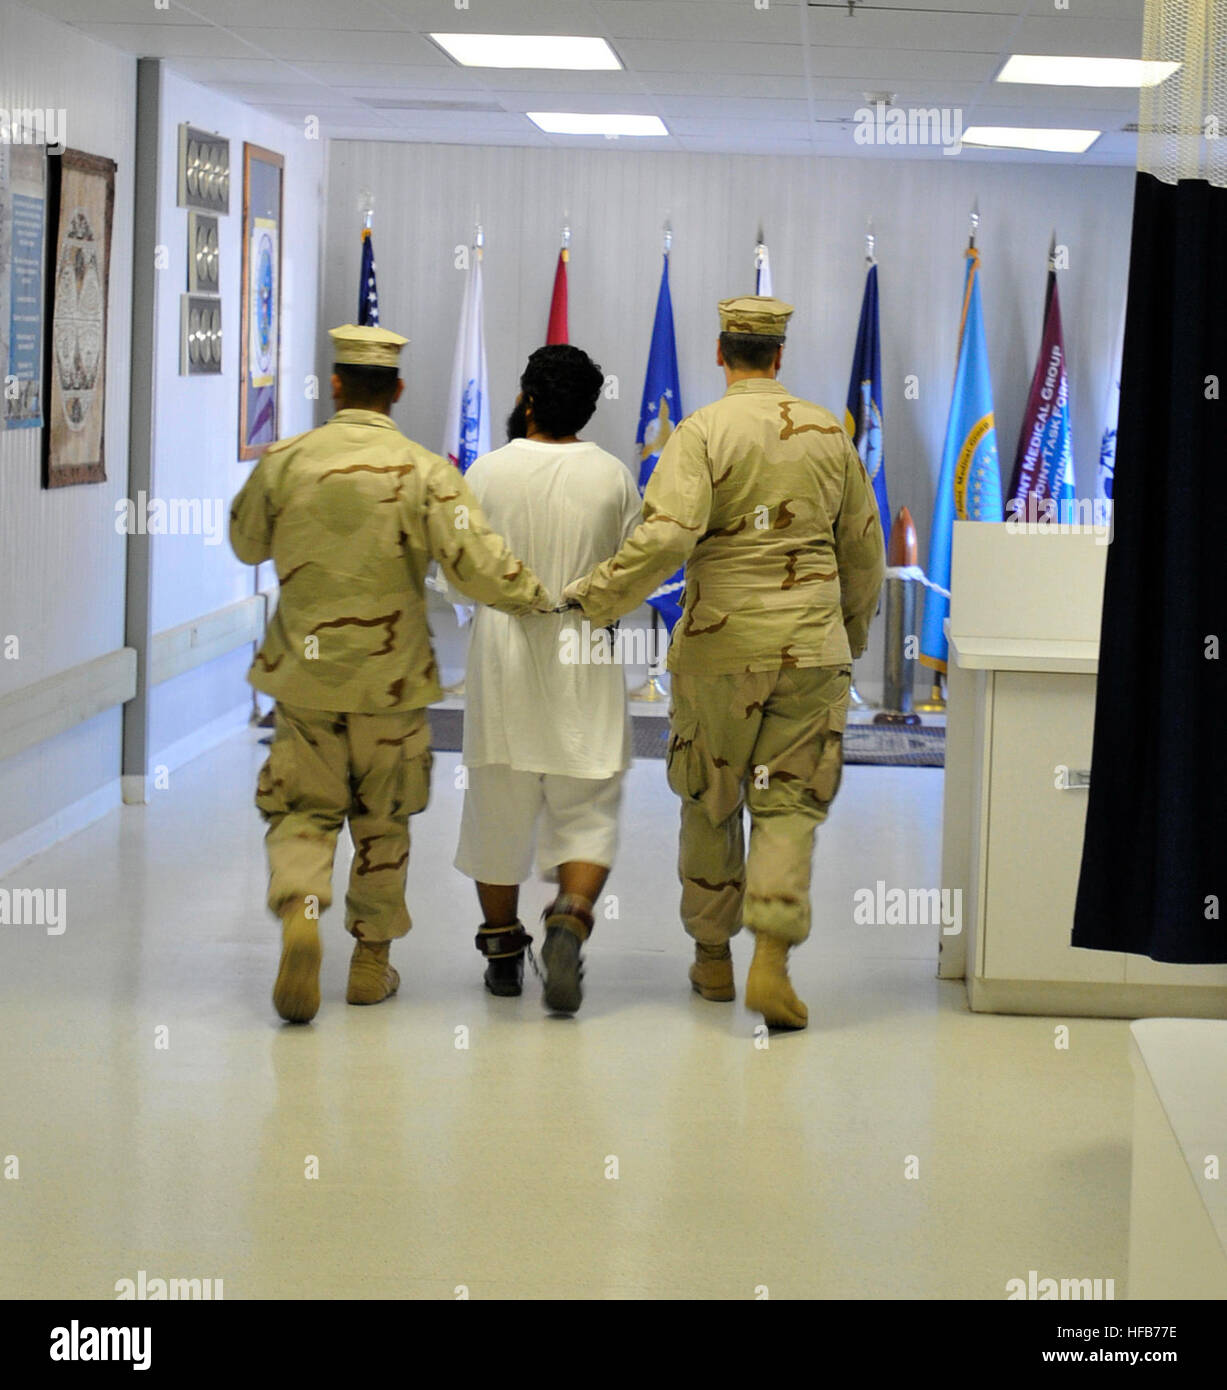 A detainee is escorted to the detainee hospital for patient care by personnel from the Joint Medical Group, which provides medical care to detainees. Detainee care at Guantanamo Bay 336095 Stock Photo